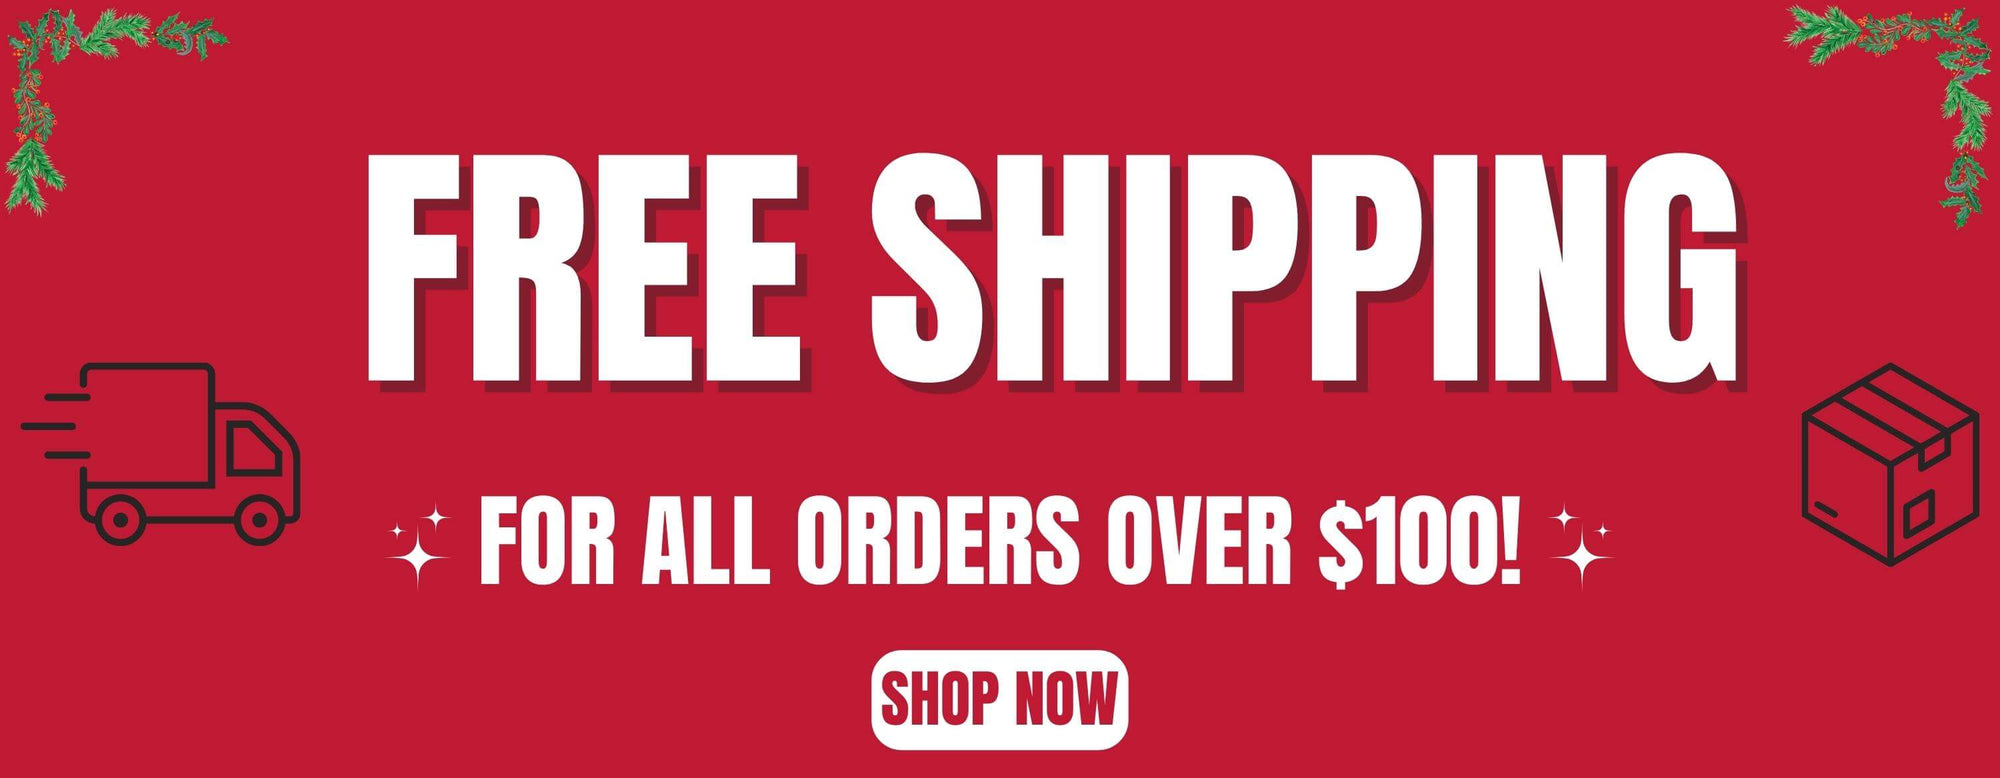 Free Shipping on All Orders Over $100. Shop Now